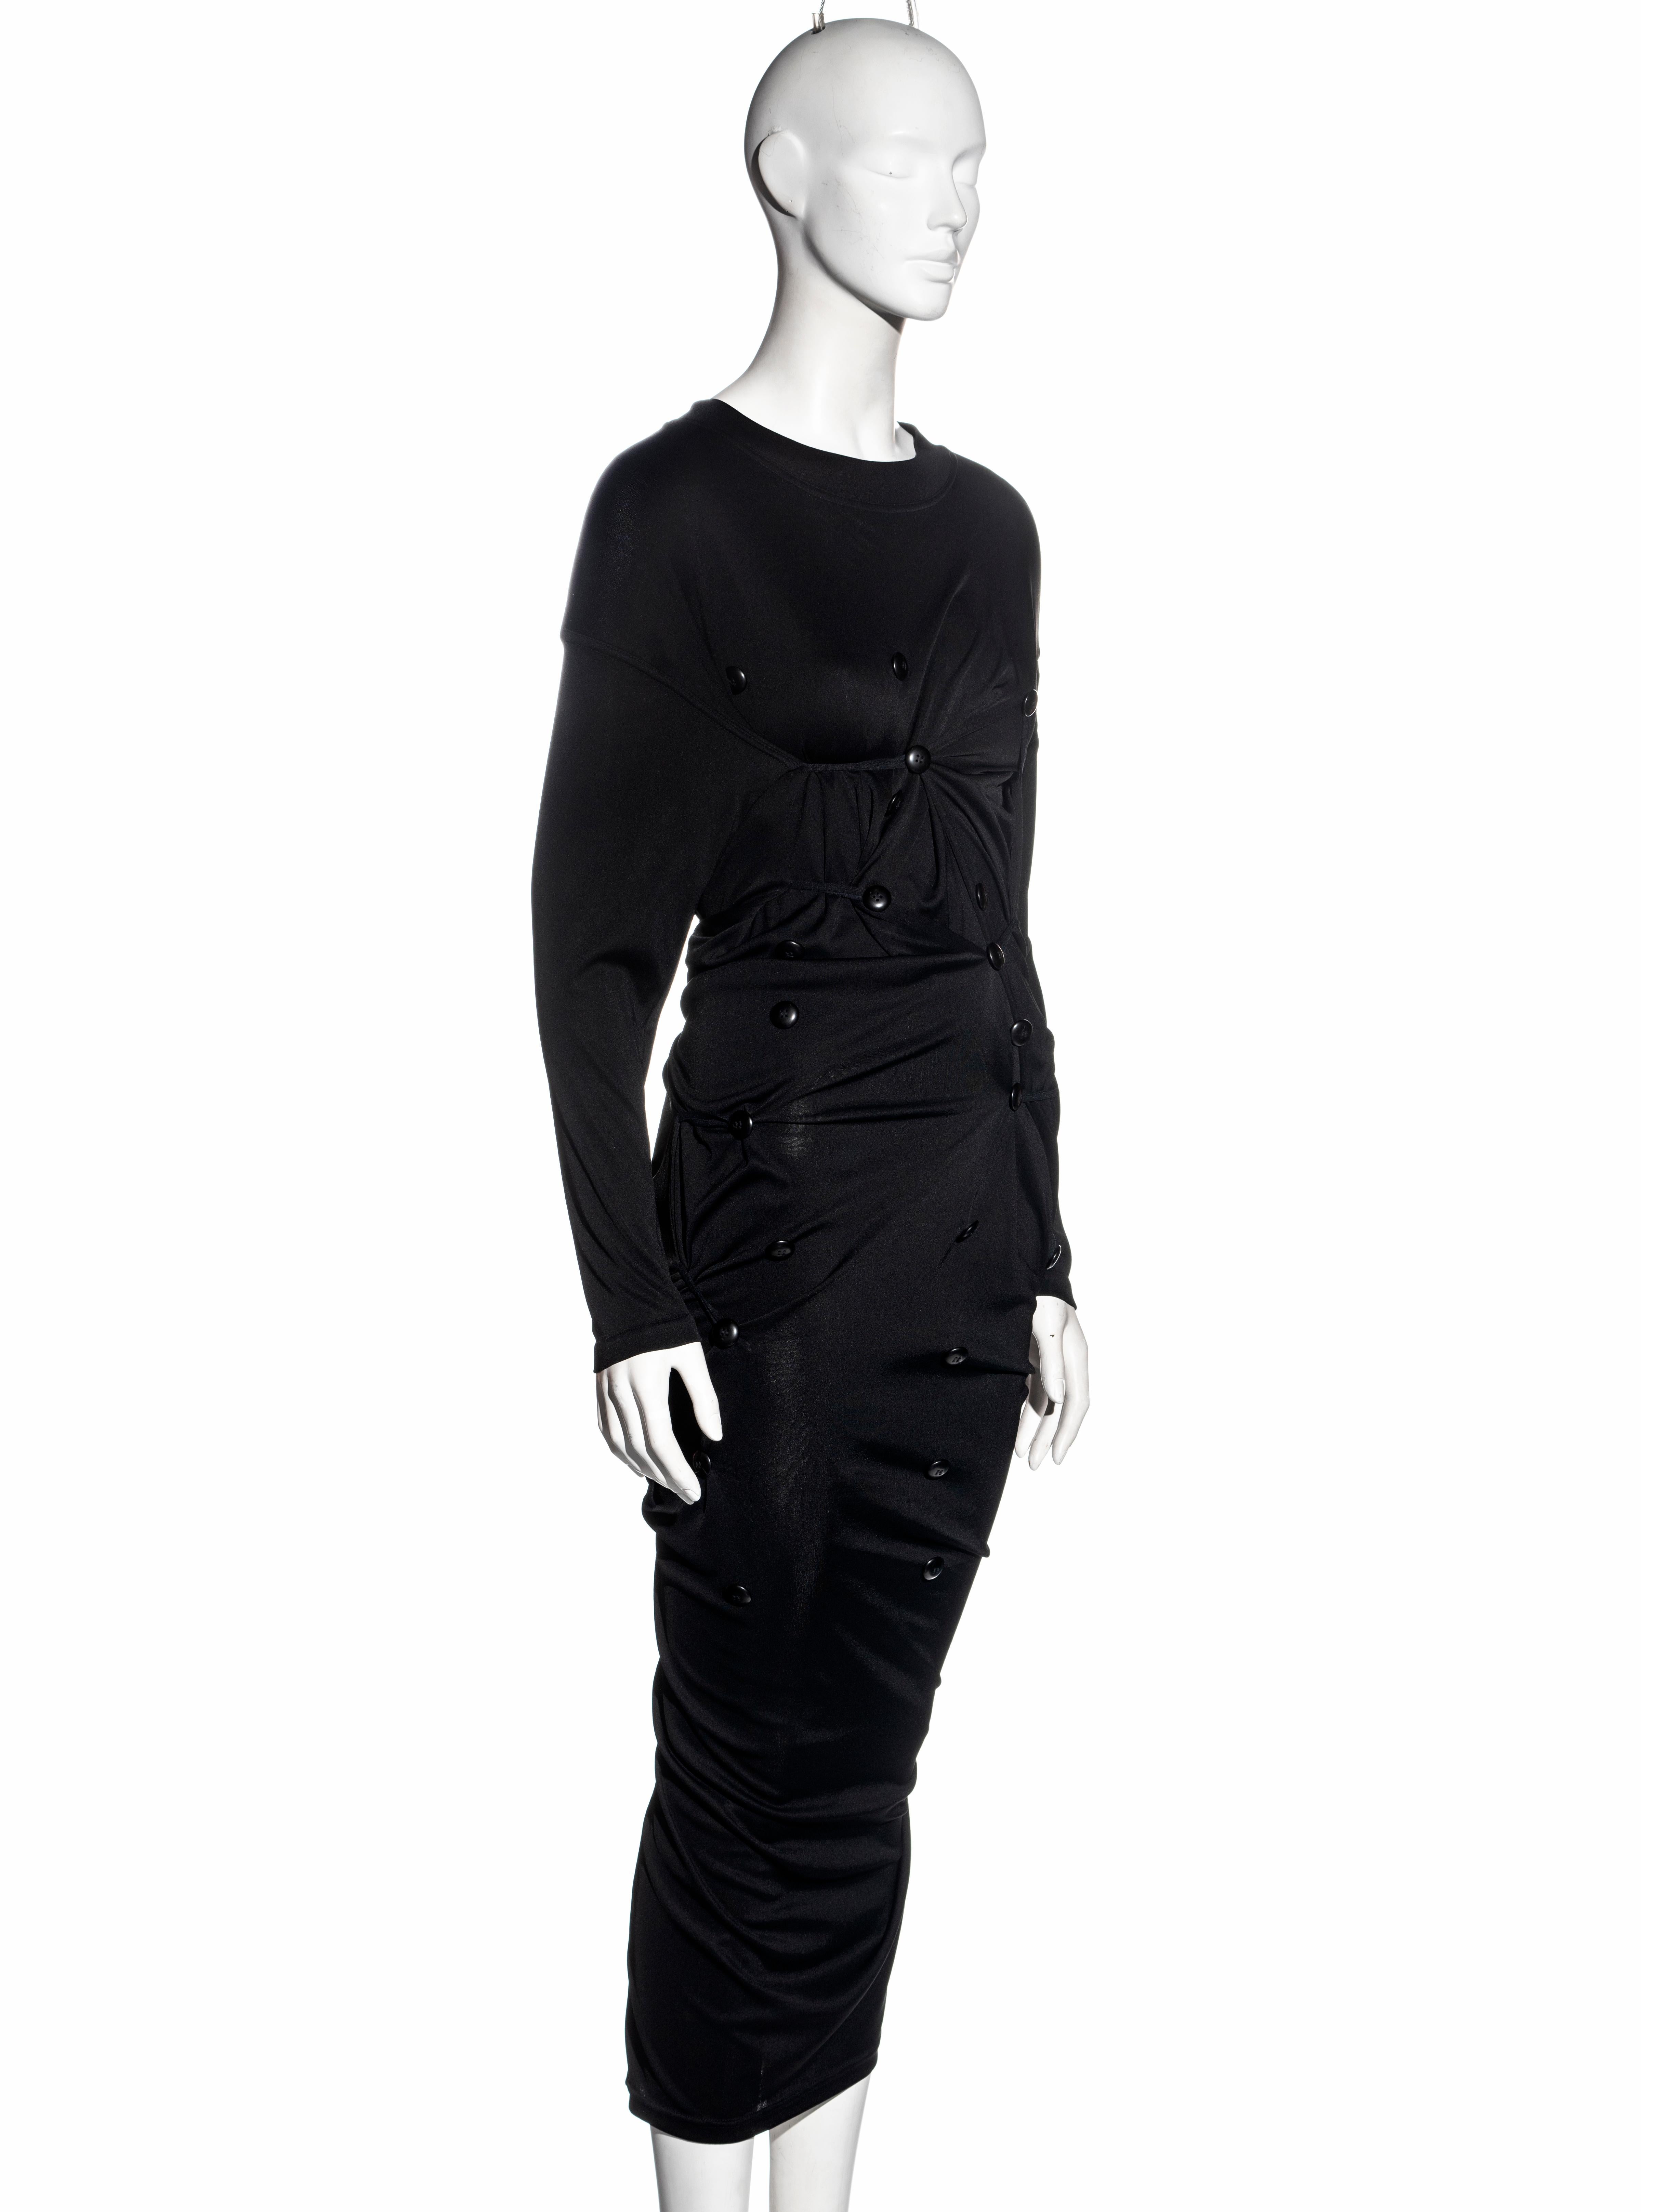 Women's Dolce & Gabbana black jersey maxi dress with adjustable button closures, fw 1987 For Sale